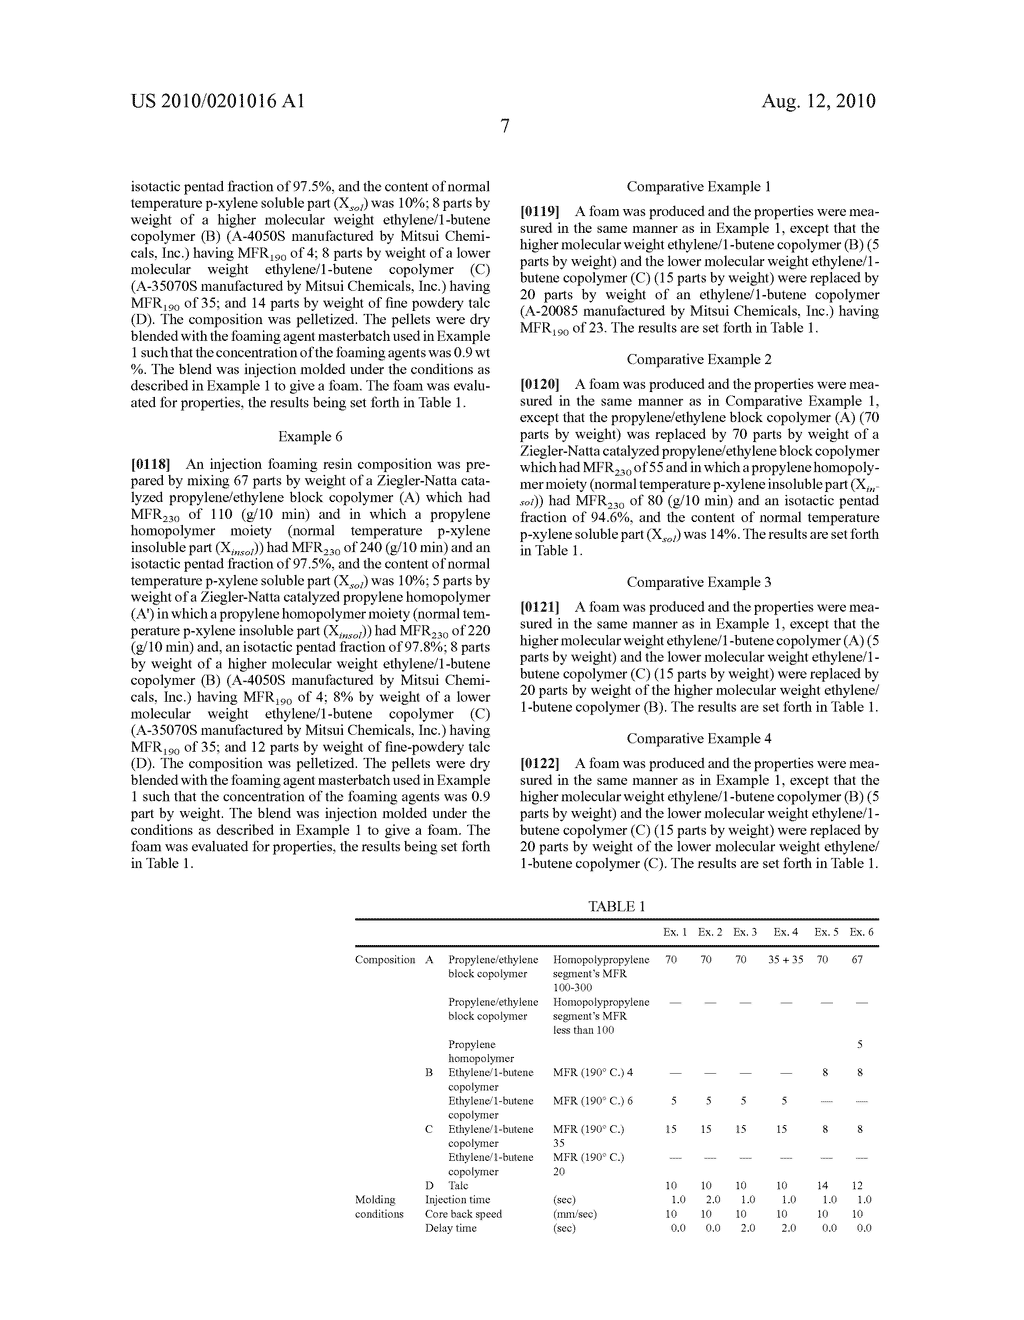 FOAMING POLYPROPYLENE RESIN COMPOSITION AND PROCESS FOR PRODUCING INJECTION-MOLDED FOAMS FROM THE COMPOSITION - diagram, schematic, and image 08